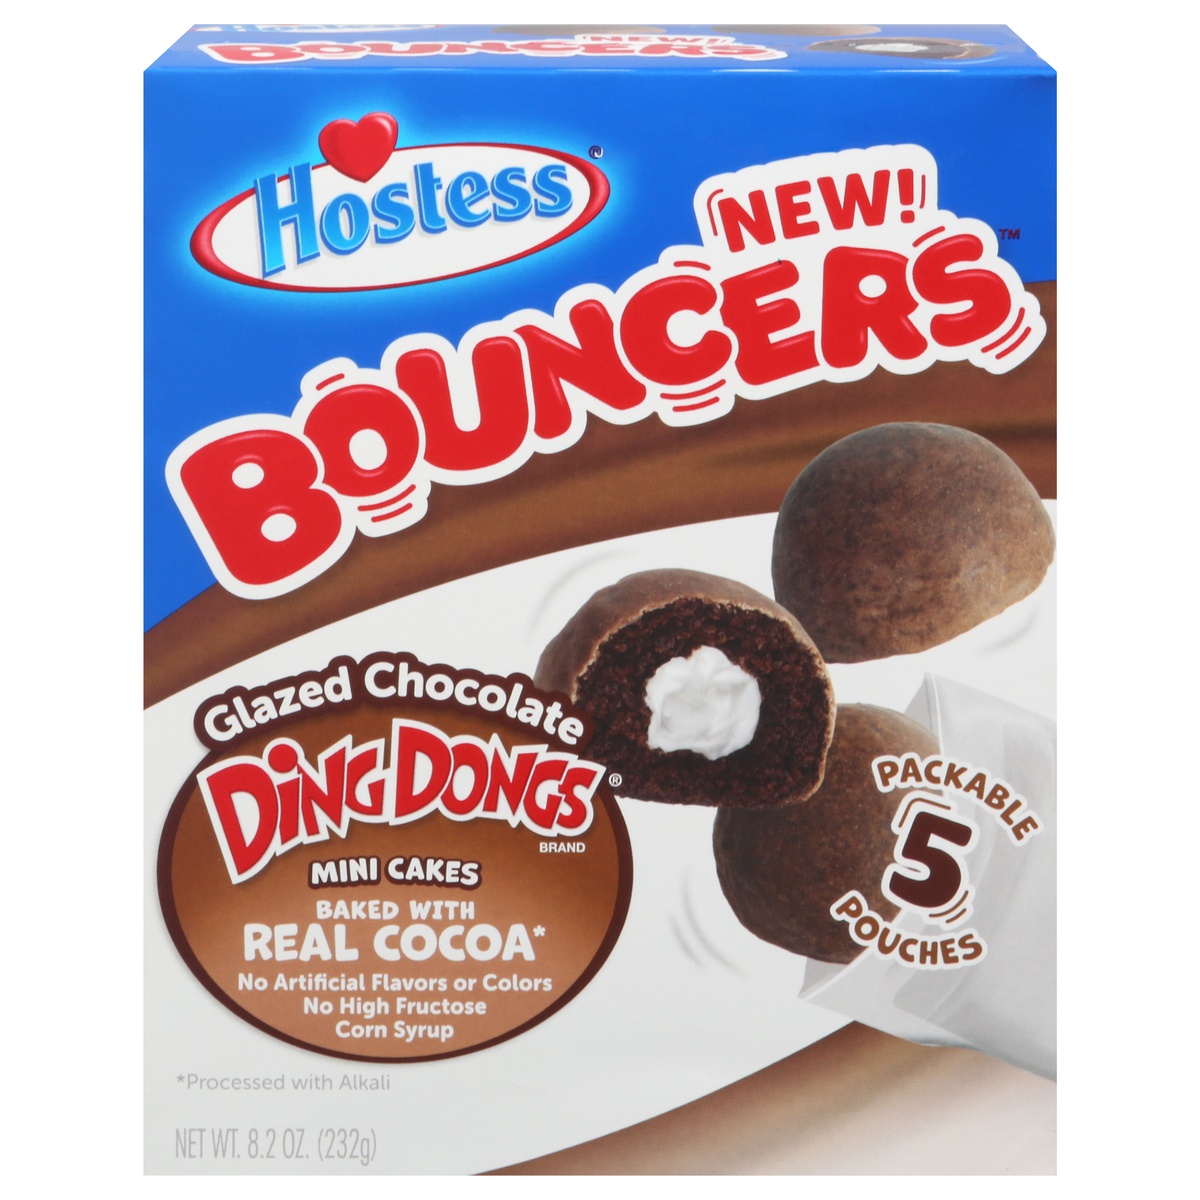 slide 11 of 11, Hostess Bouncers Glazed Chocolate Ding Dongs, 5 ct  9.95 oz